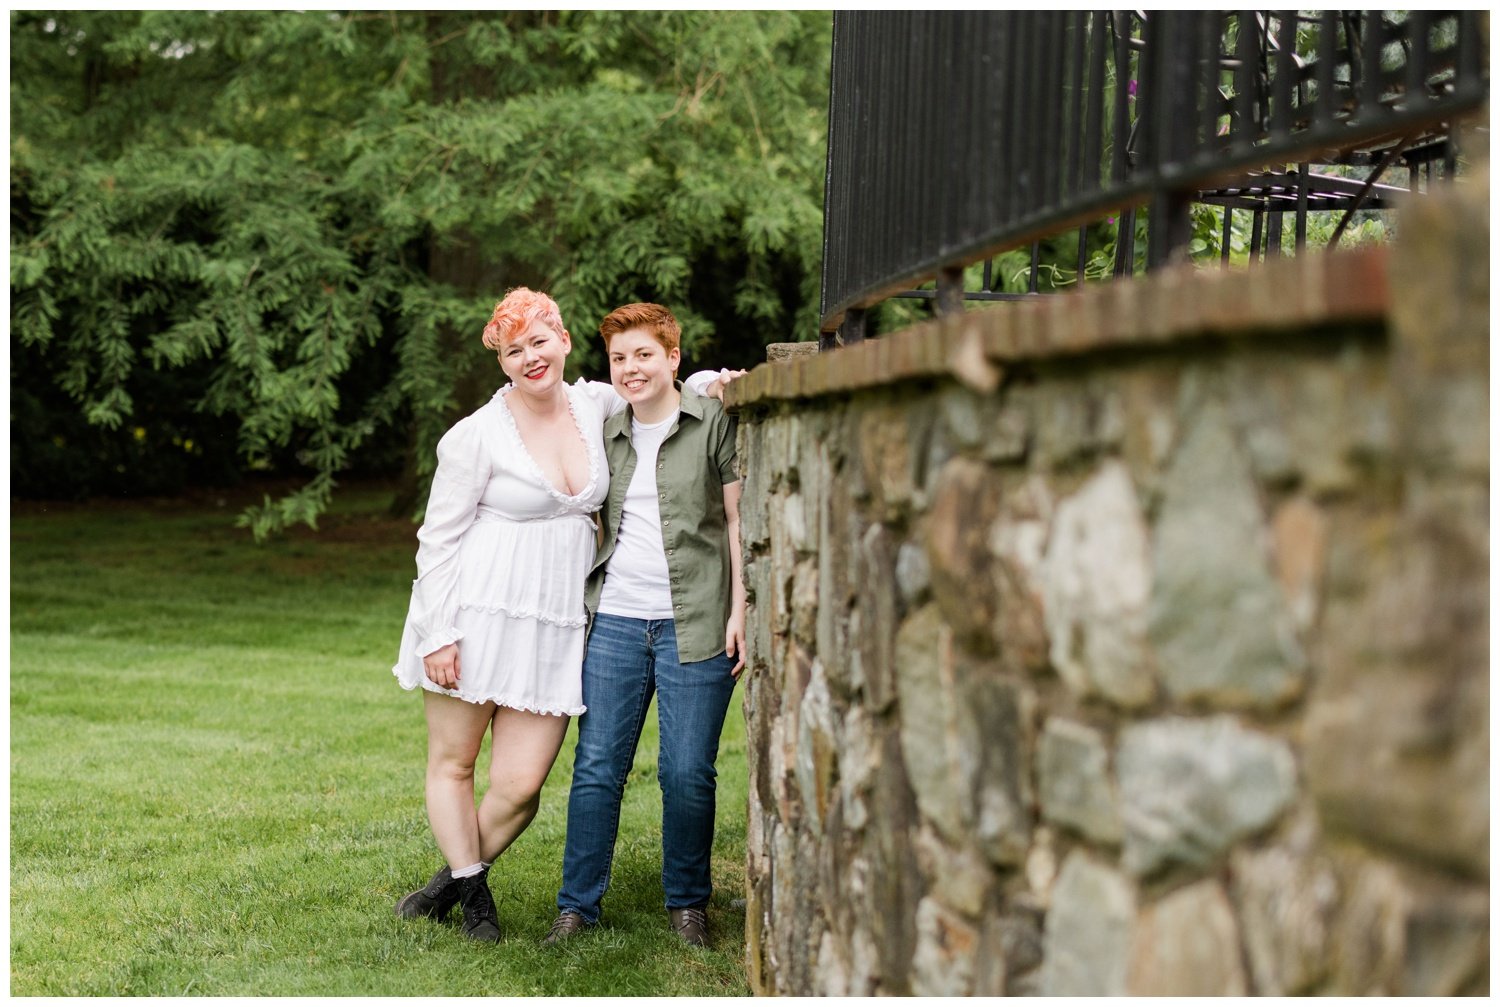 Queer-Engagement-Photos-Longwood-Gardens-Philly-Photographer-LGBTQ-3.jpg